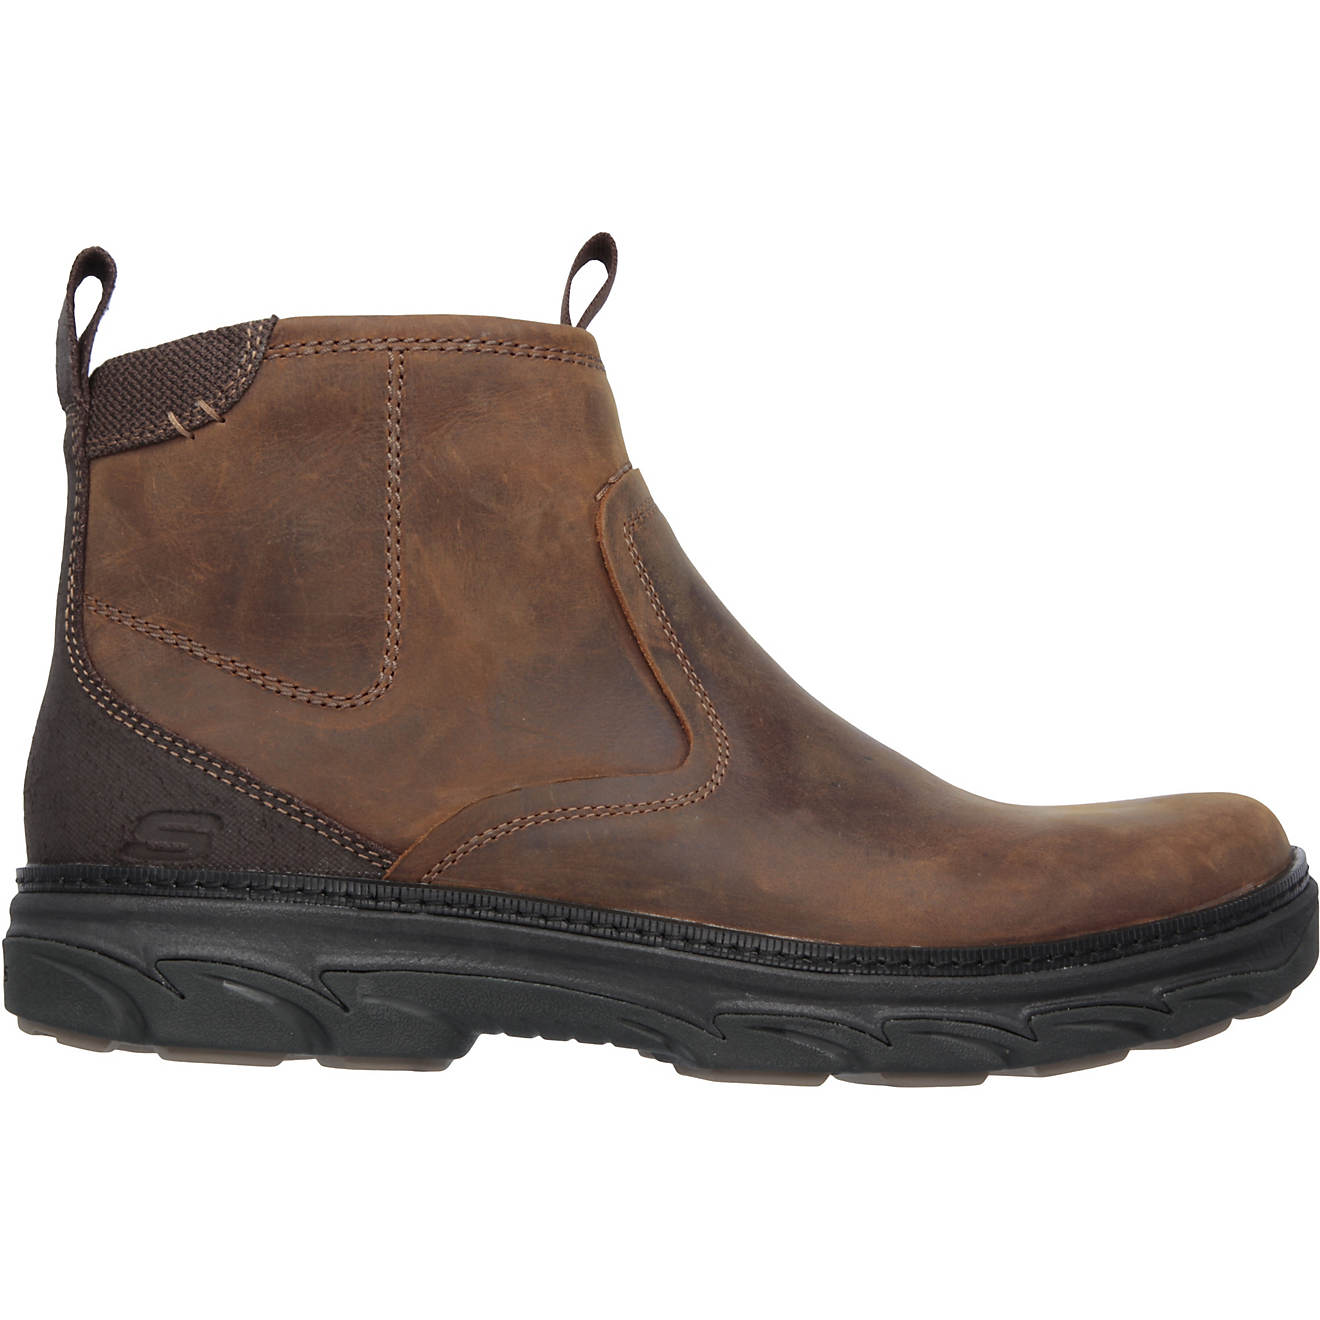 Basket Overwhelm Outward SKECHERS Men's Relaxed Fit Resment Boots | Academy